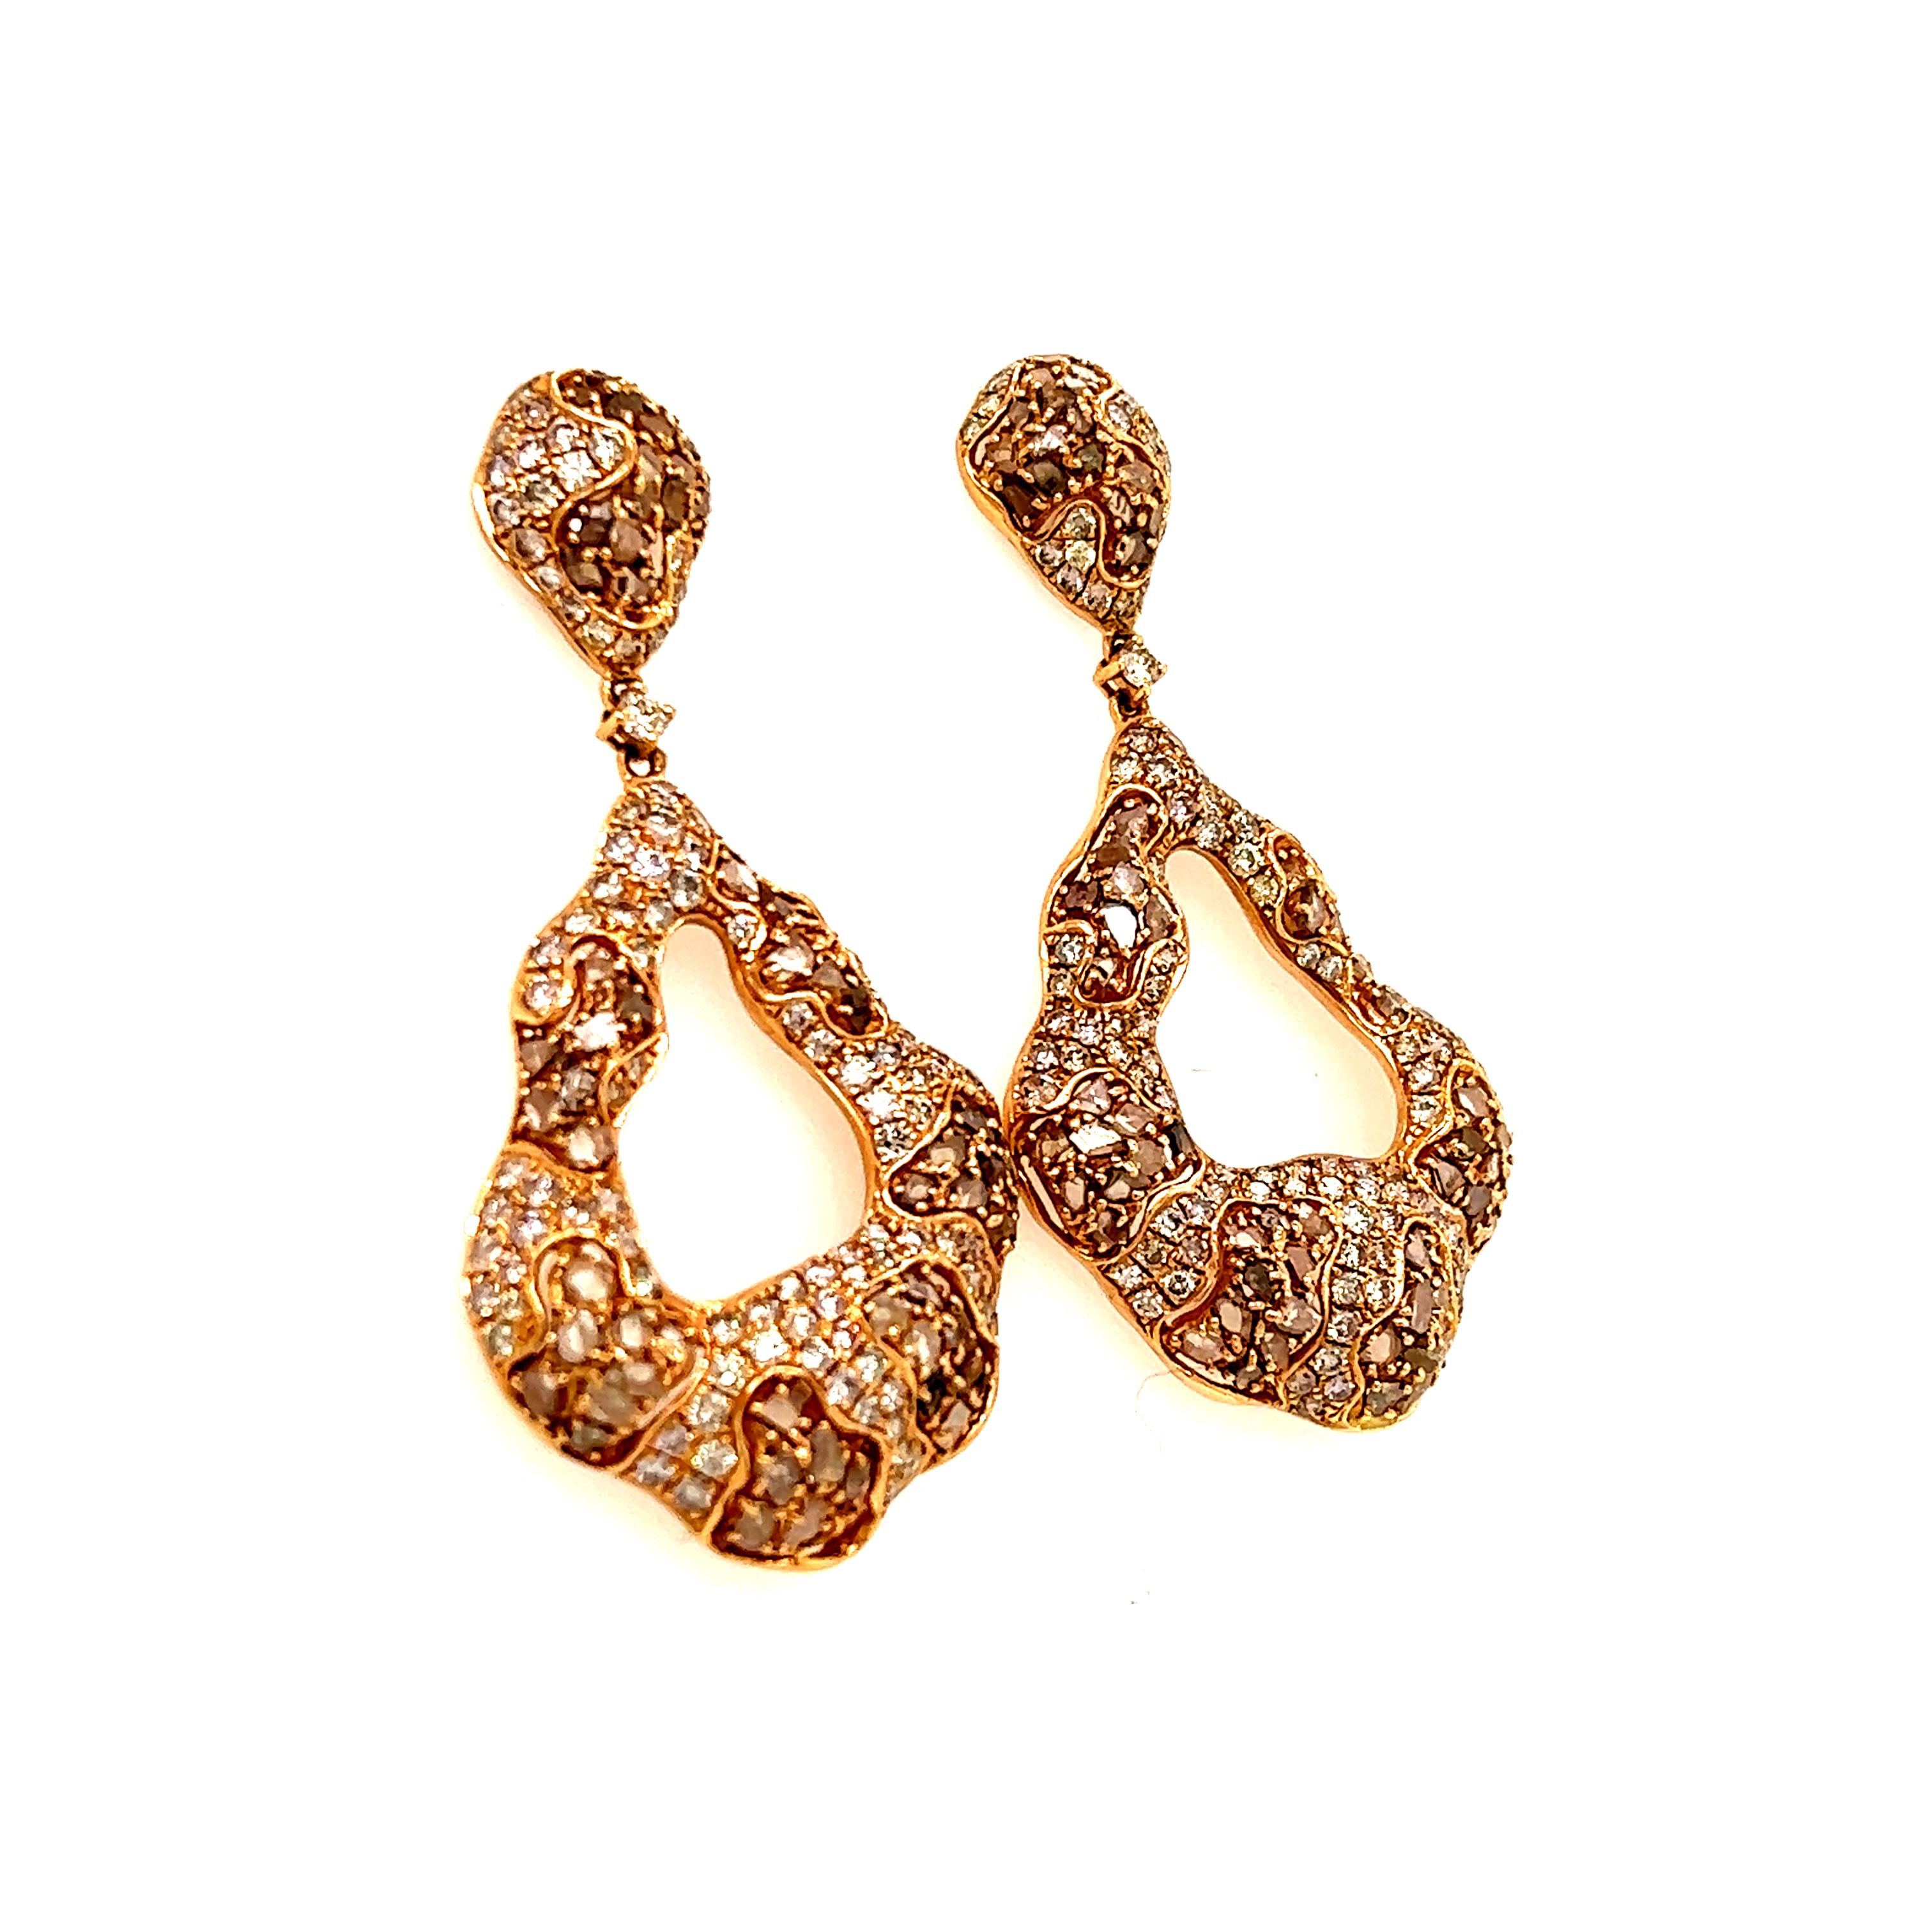 Beautiful pair of door knocker earrings crafted in 18k rose gold. The pair show a stud backing that leads to a dangling hoop portion with a unique vintage appeal. The earrings are set with round brilliant cut diamond accents, however the highlight